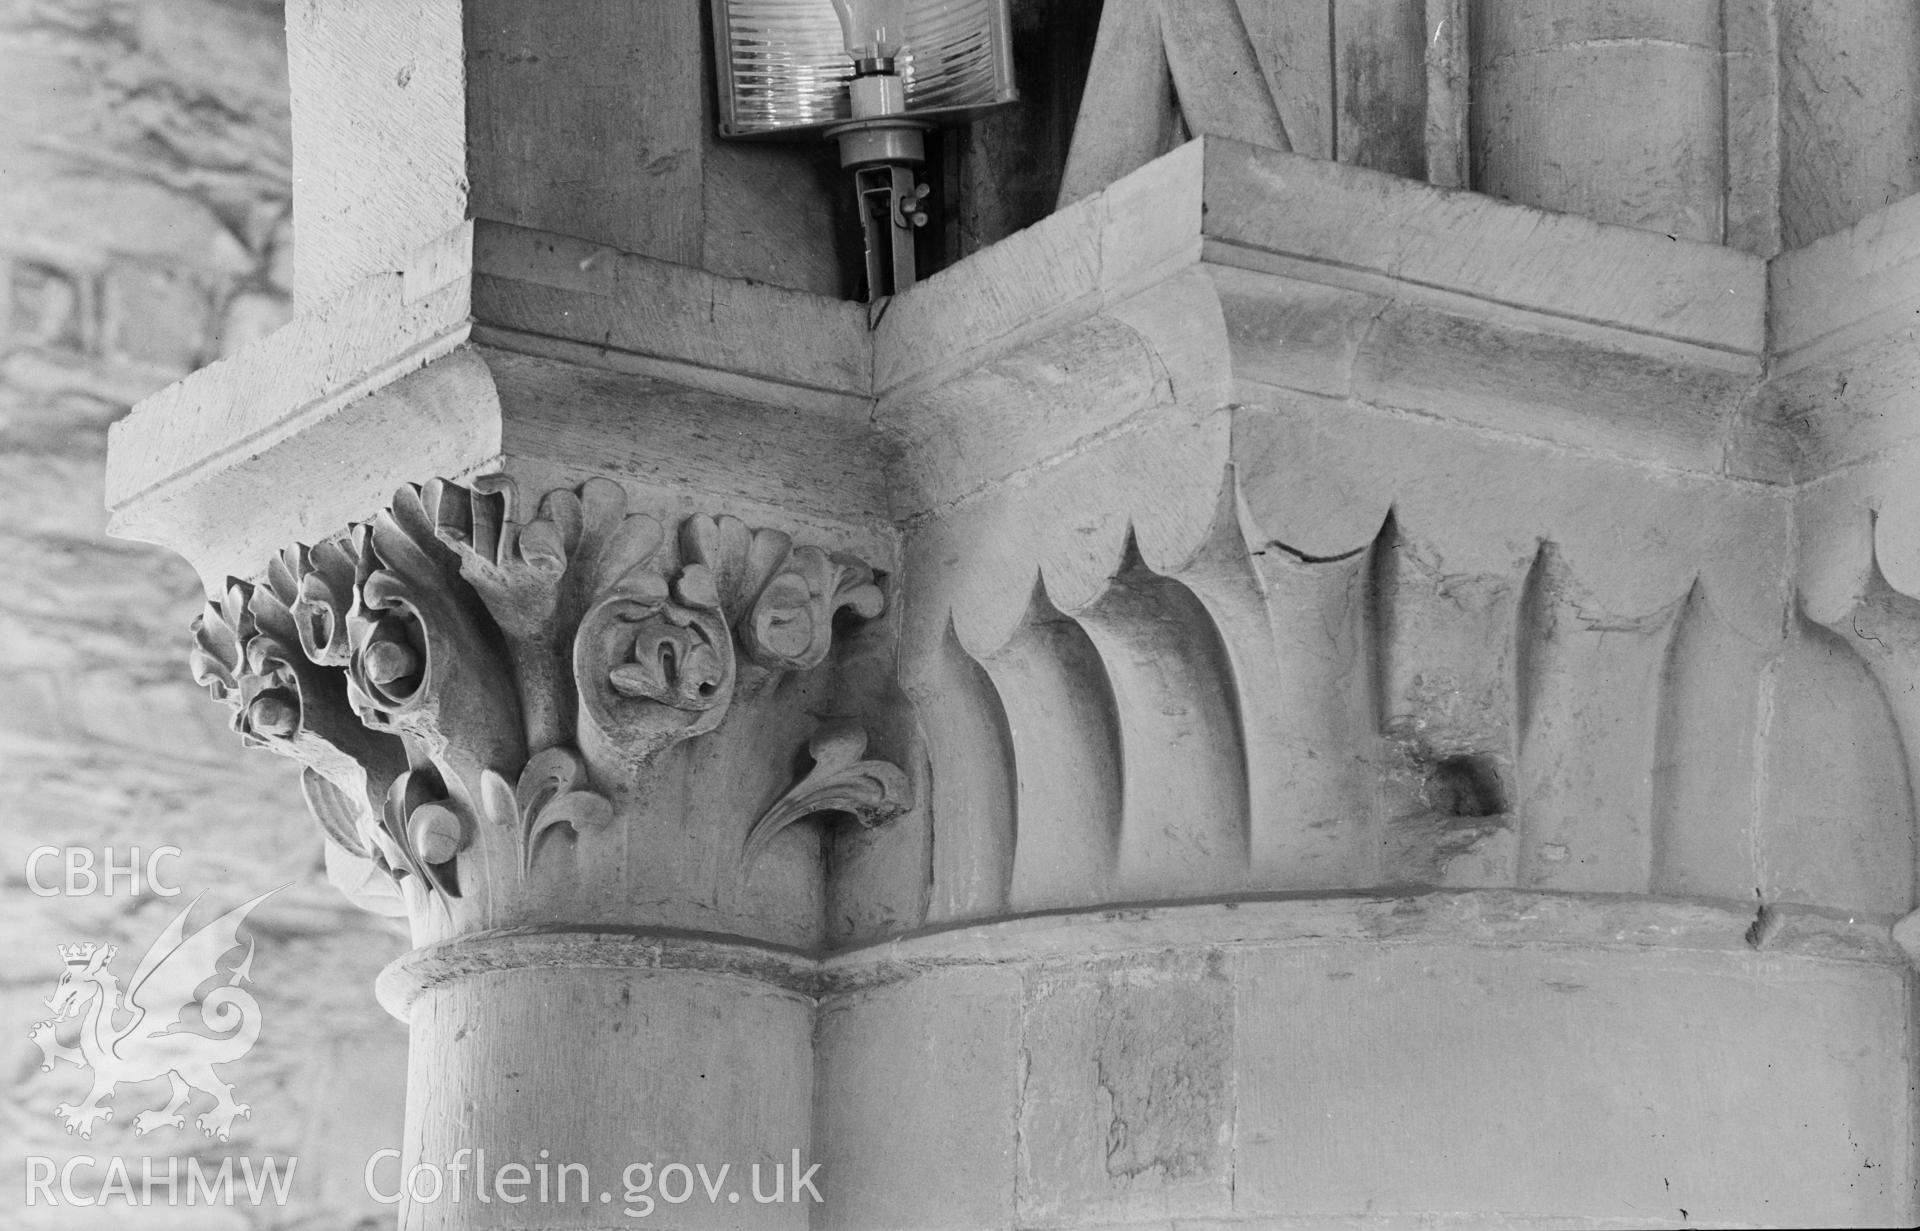 Digital copy of a black and white acetate negative showing detail view of capital at St. David's Cathedral, taken by E.W. Lovegrove, July 1936.